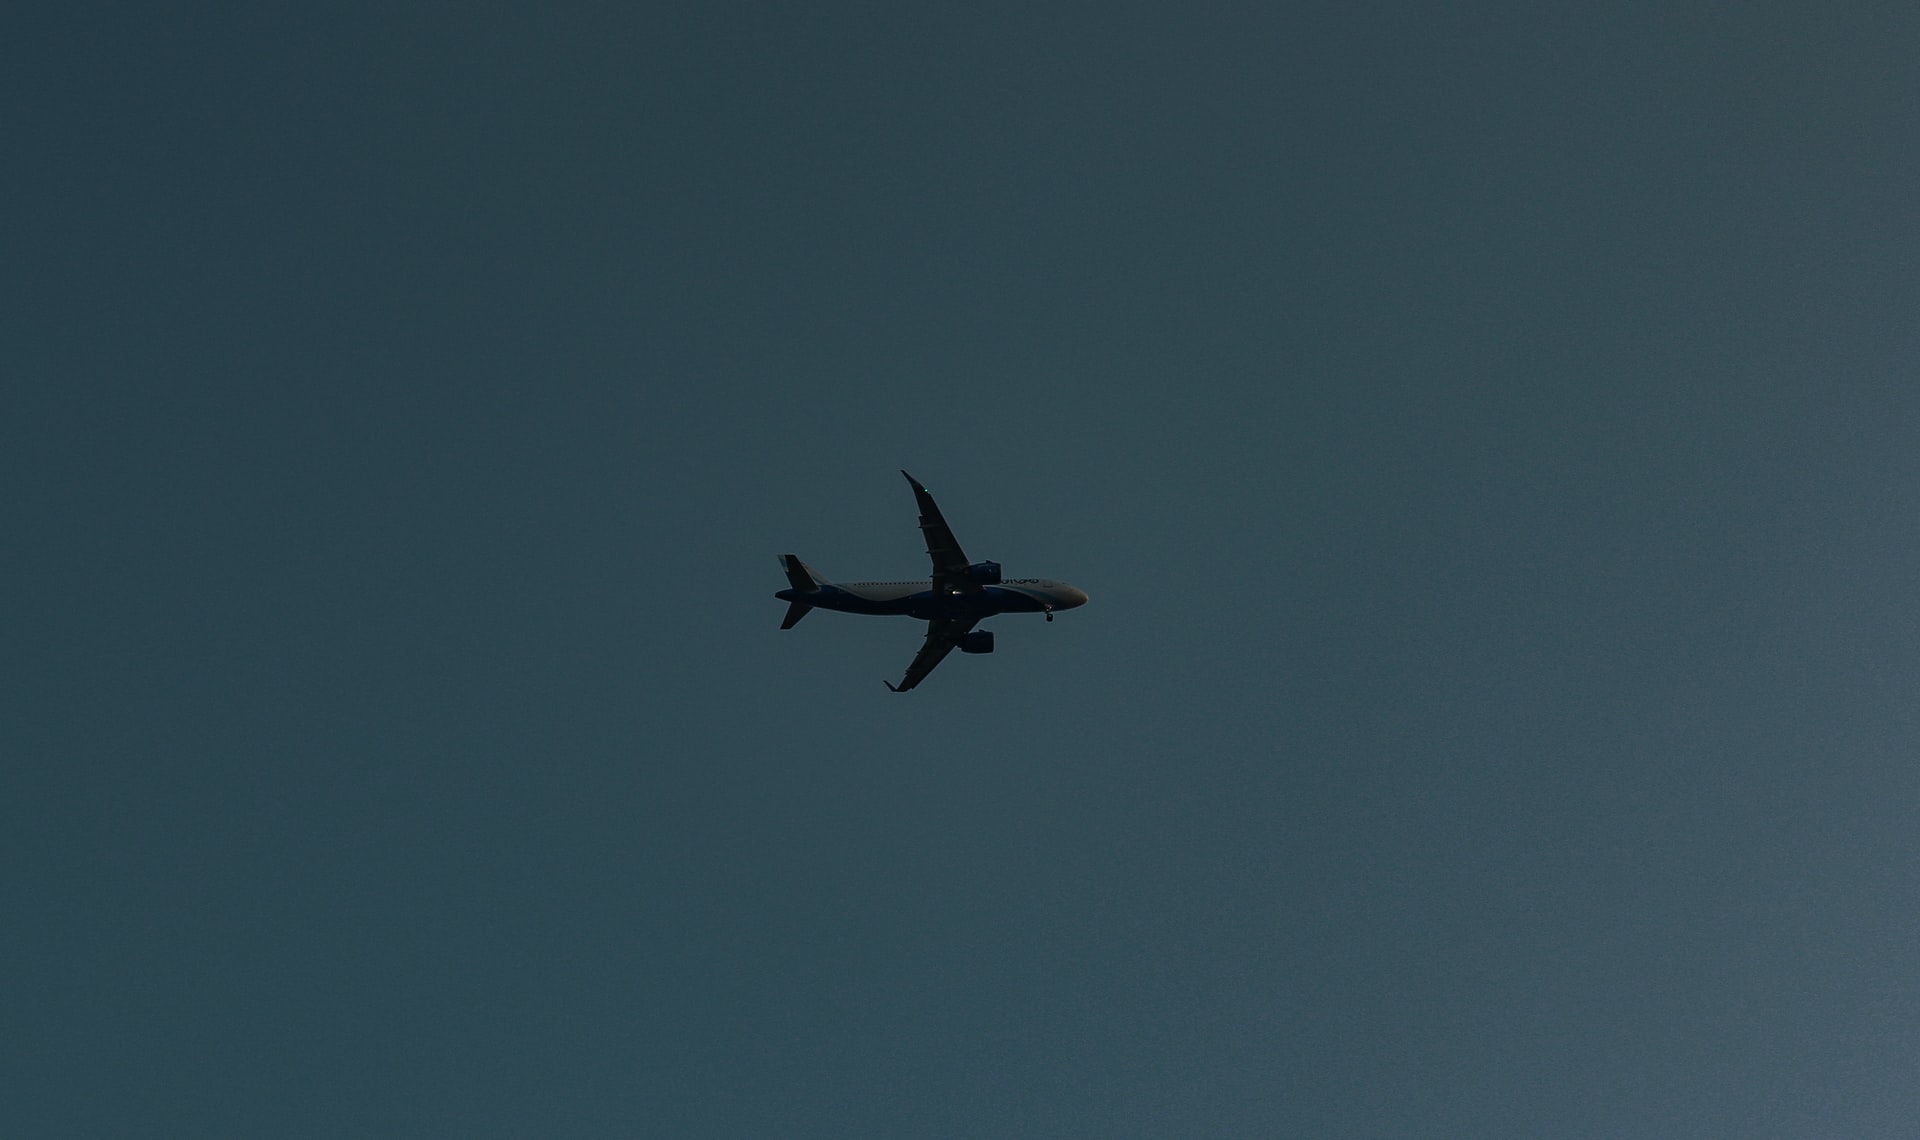 airplane on a dark background up in the air